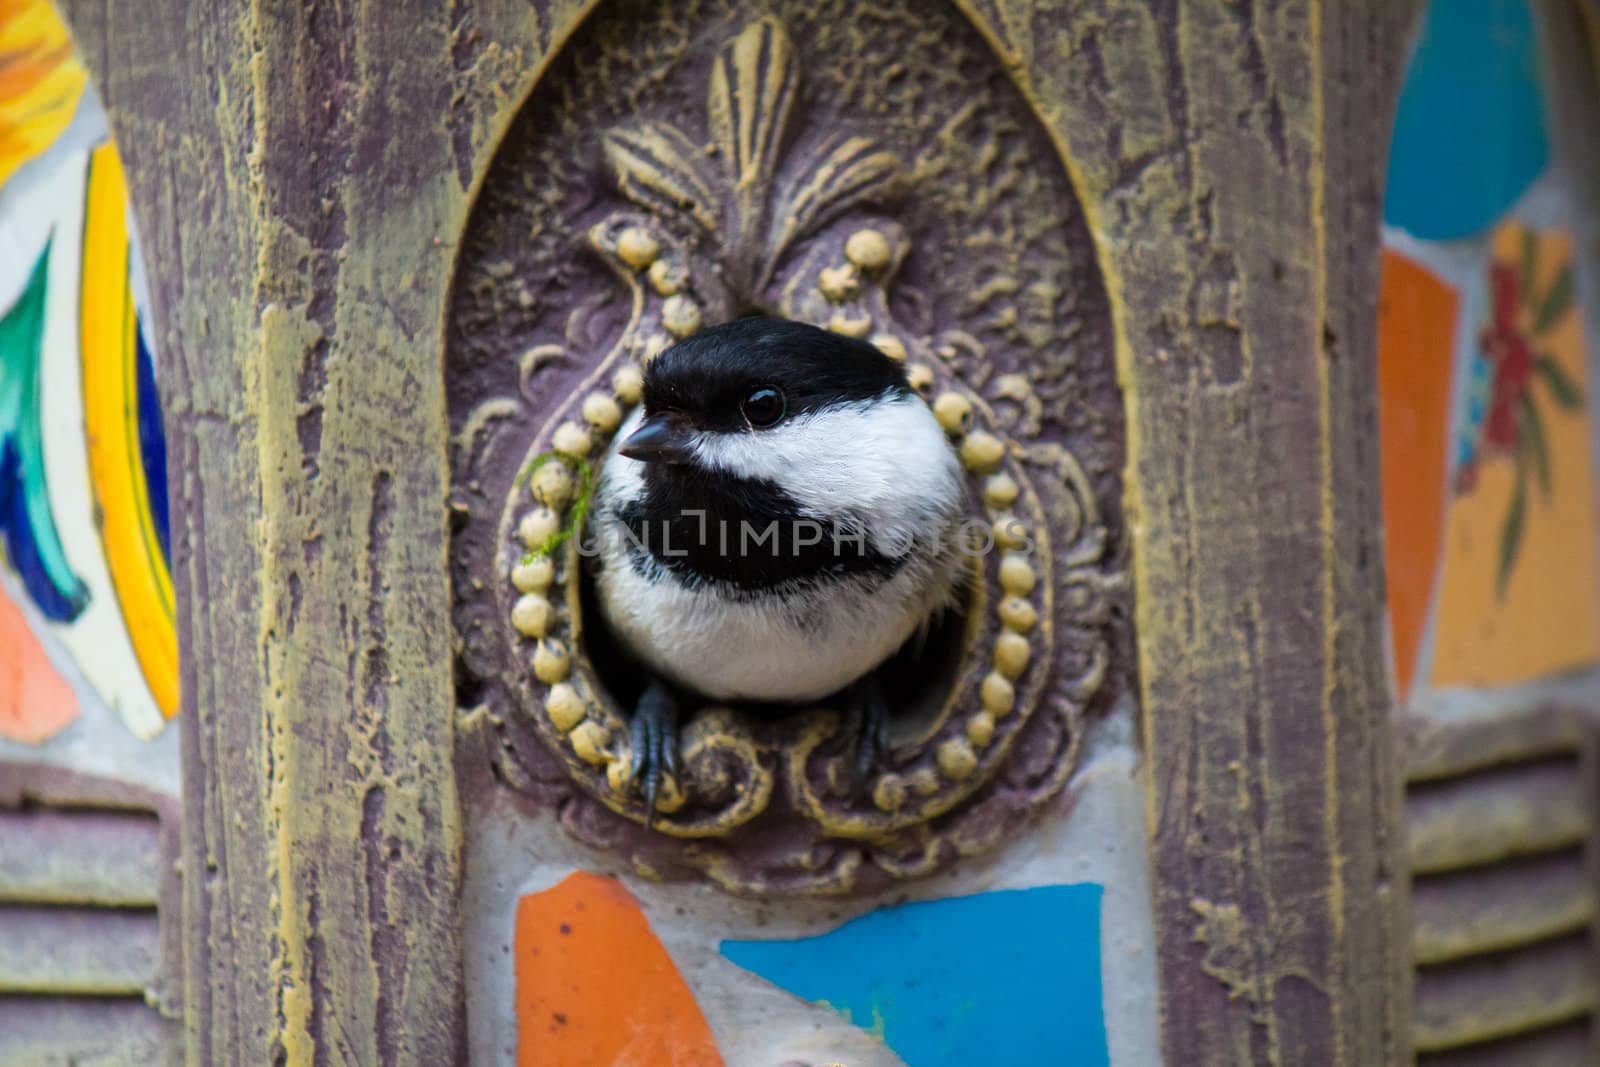 Black-capped chickadee in the birdhouse